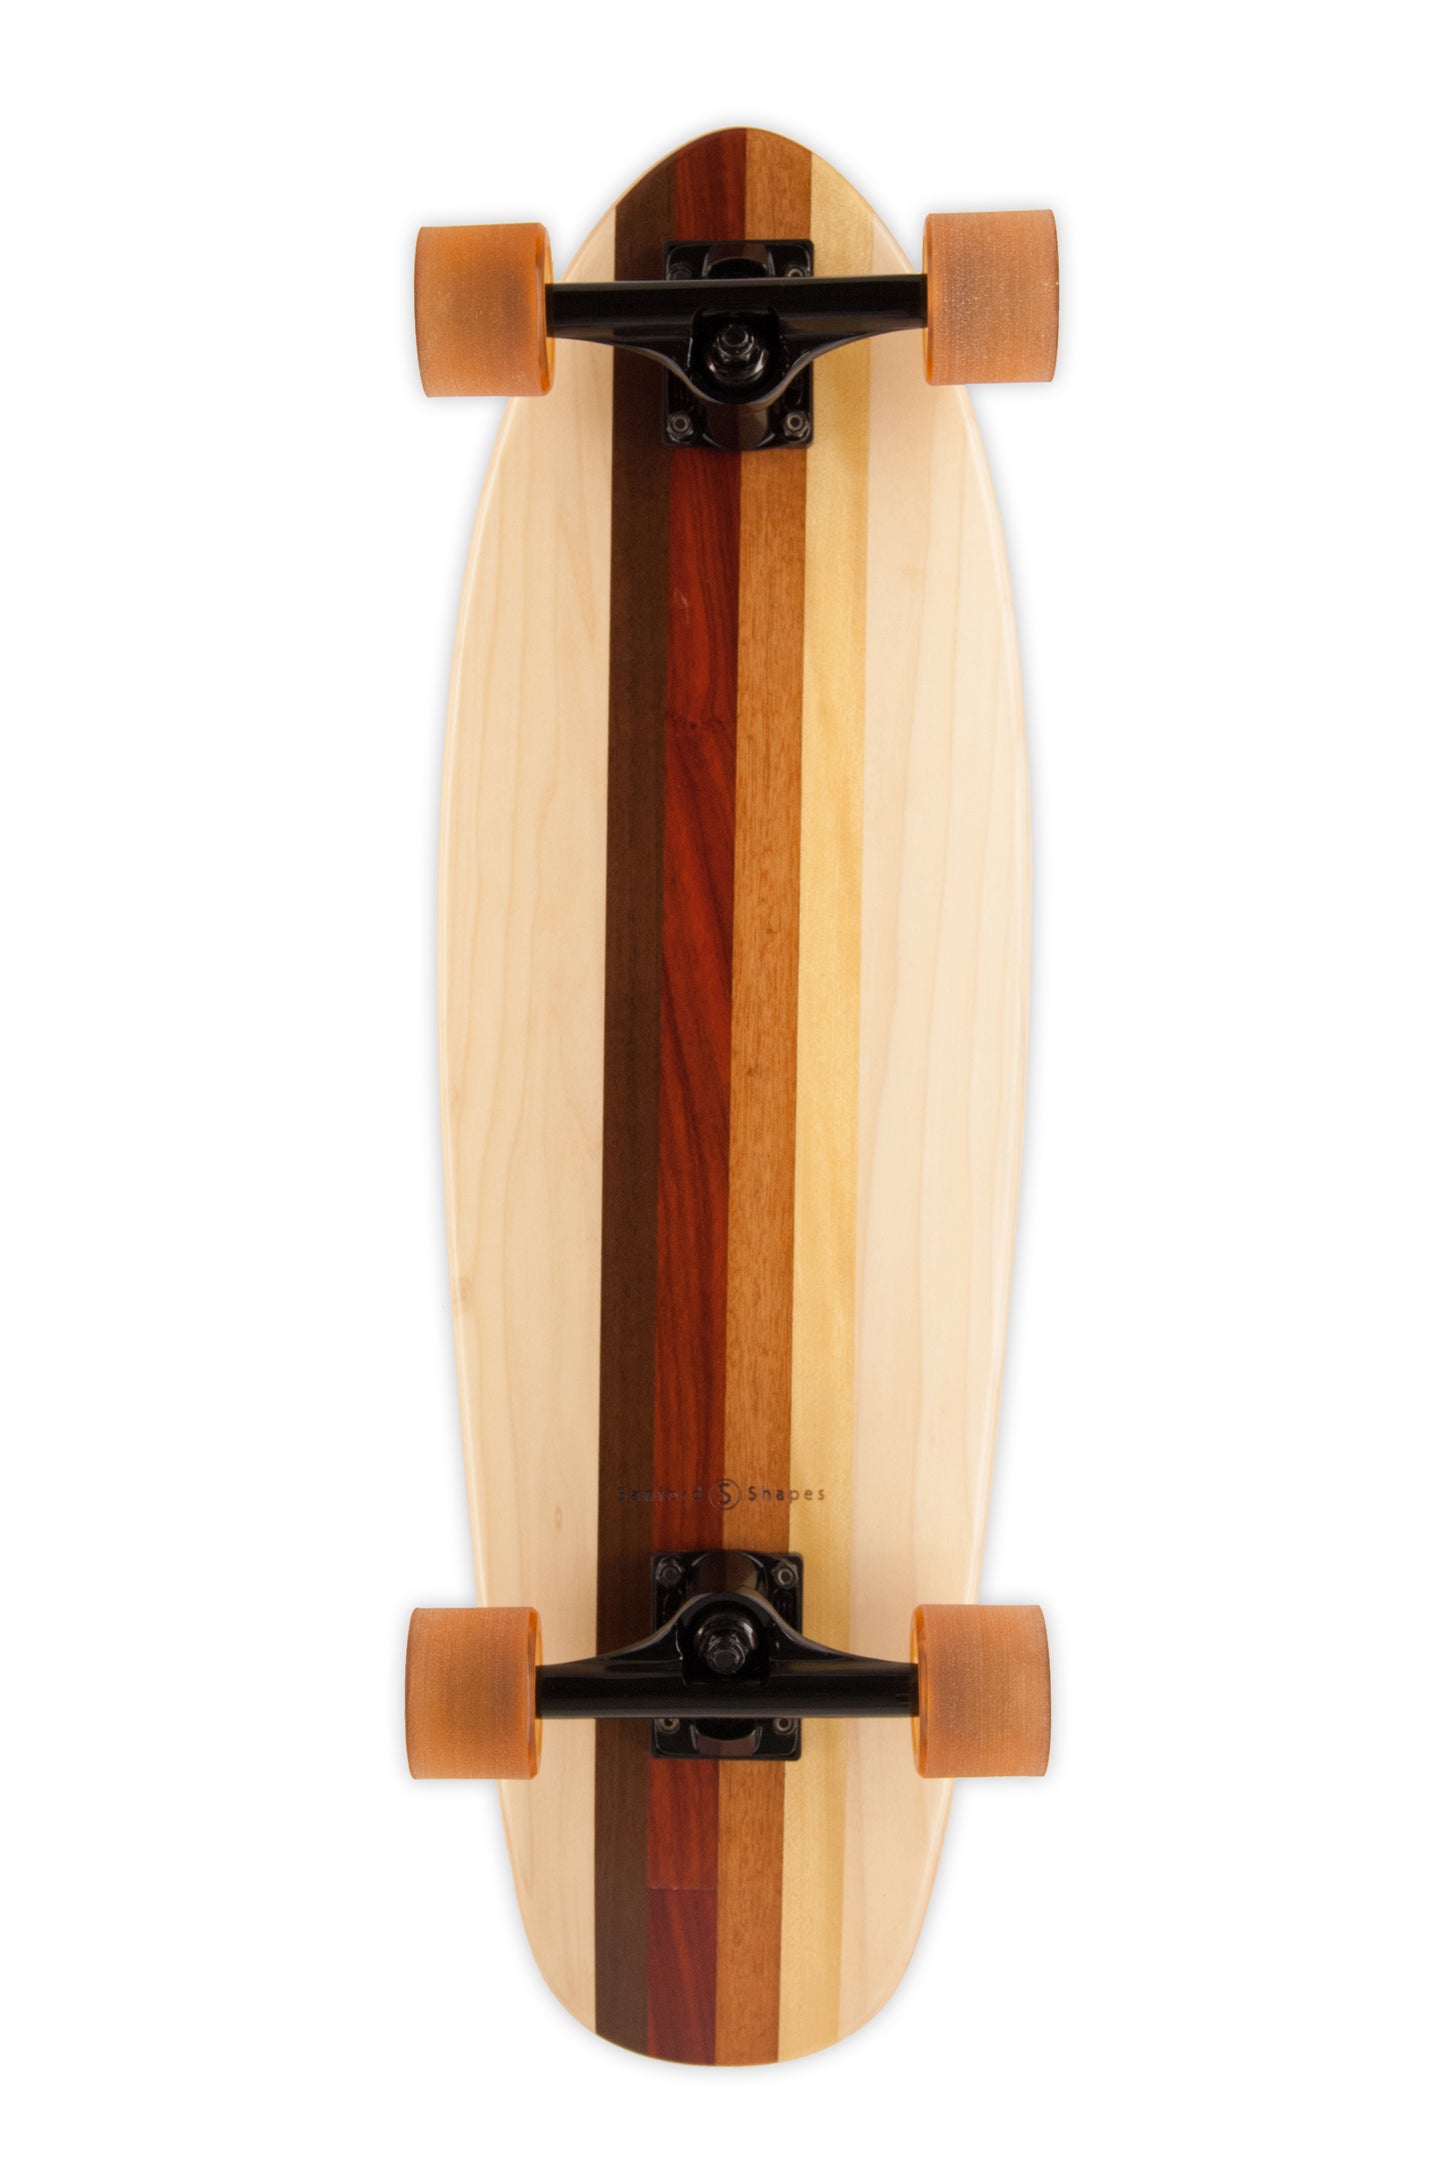 LINEUP SMALL COMPLETE SKATEBOARD 29"